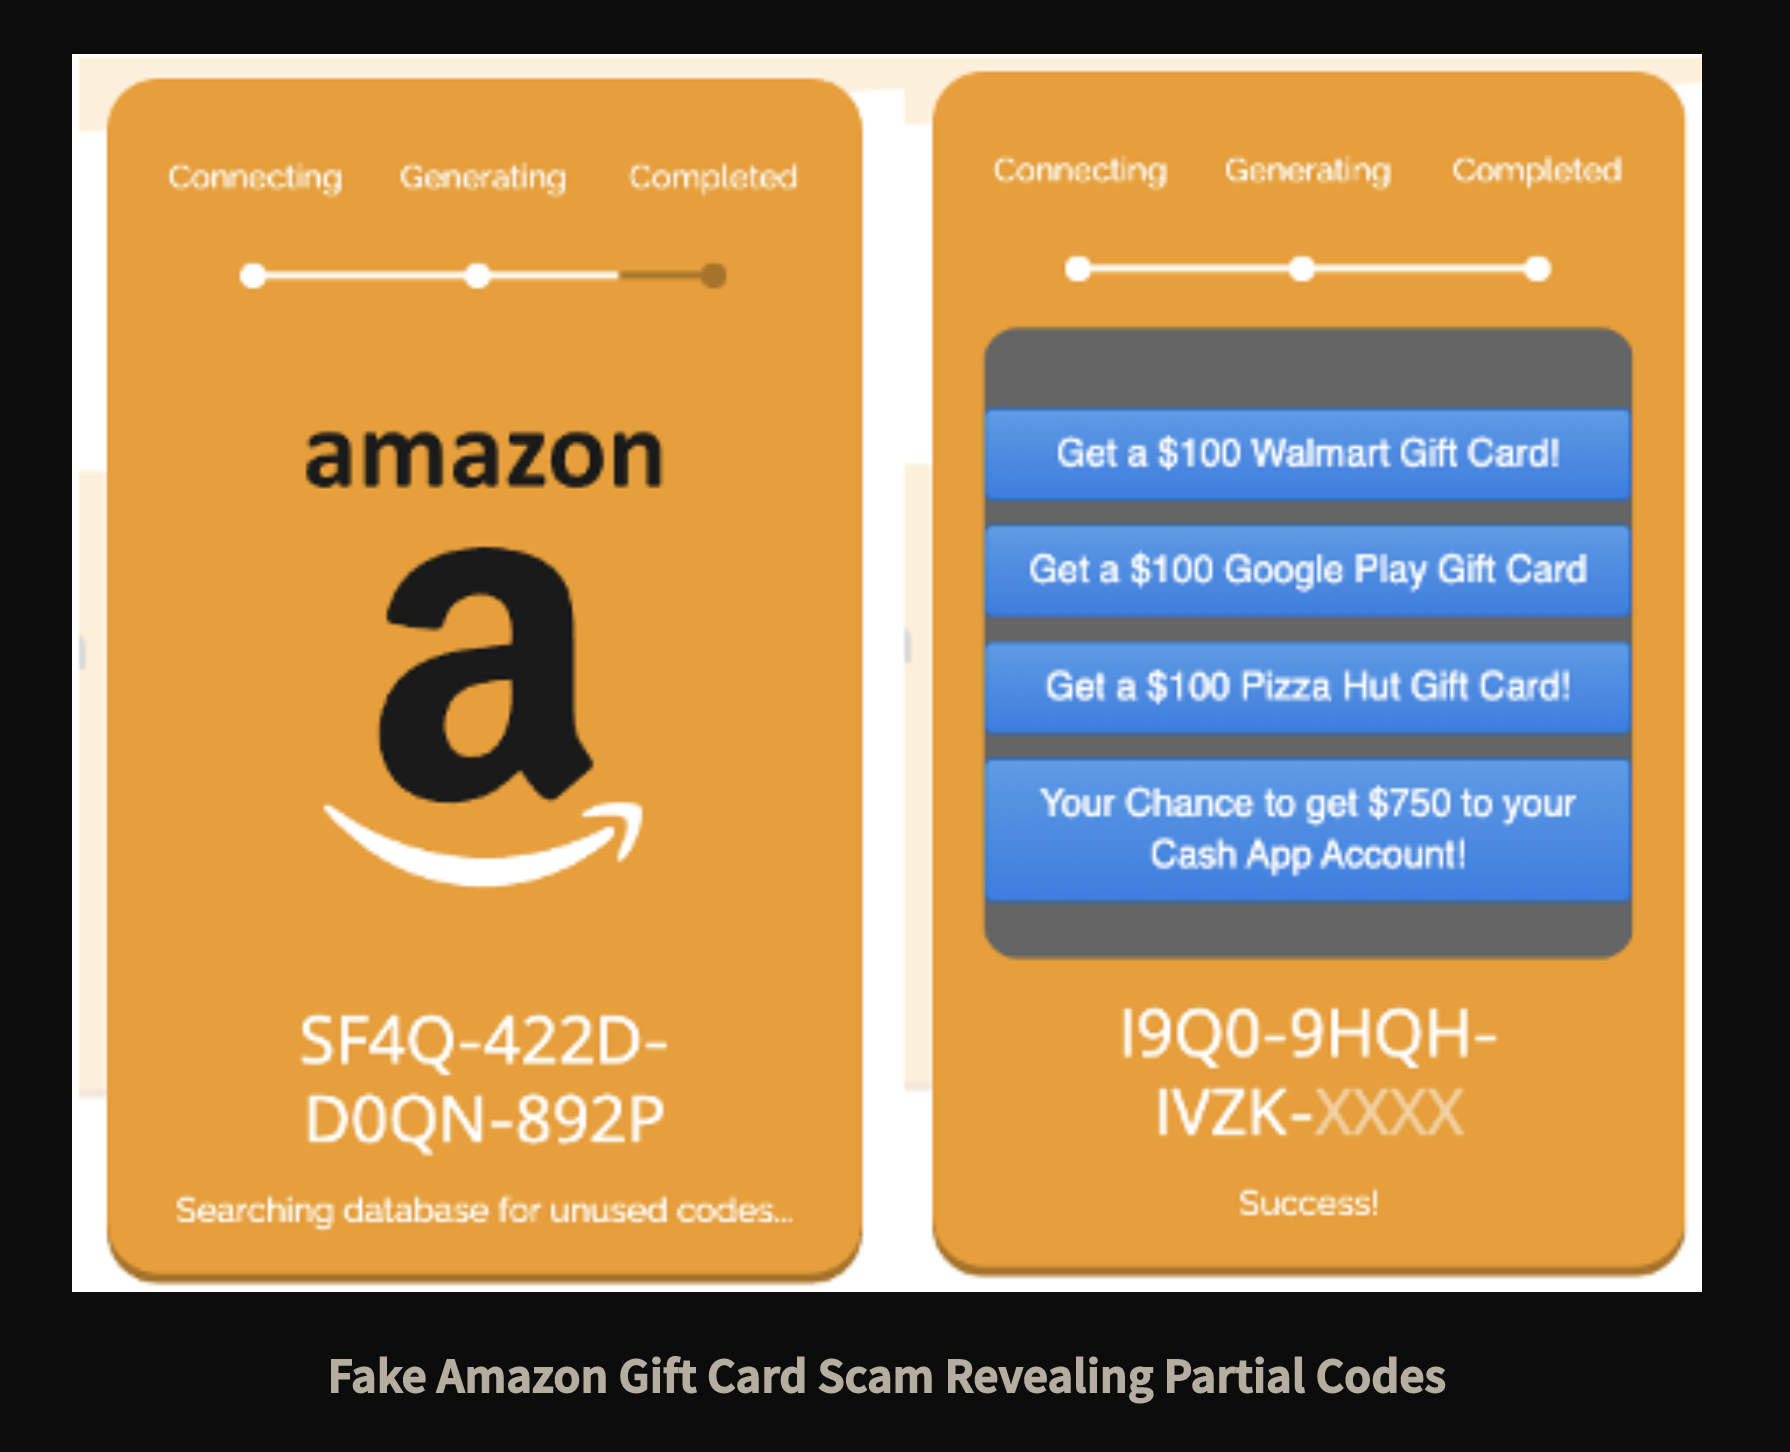 FreeStuffEU: Your email: — has been selected for this £1000 Amazon Voucher  | Milled